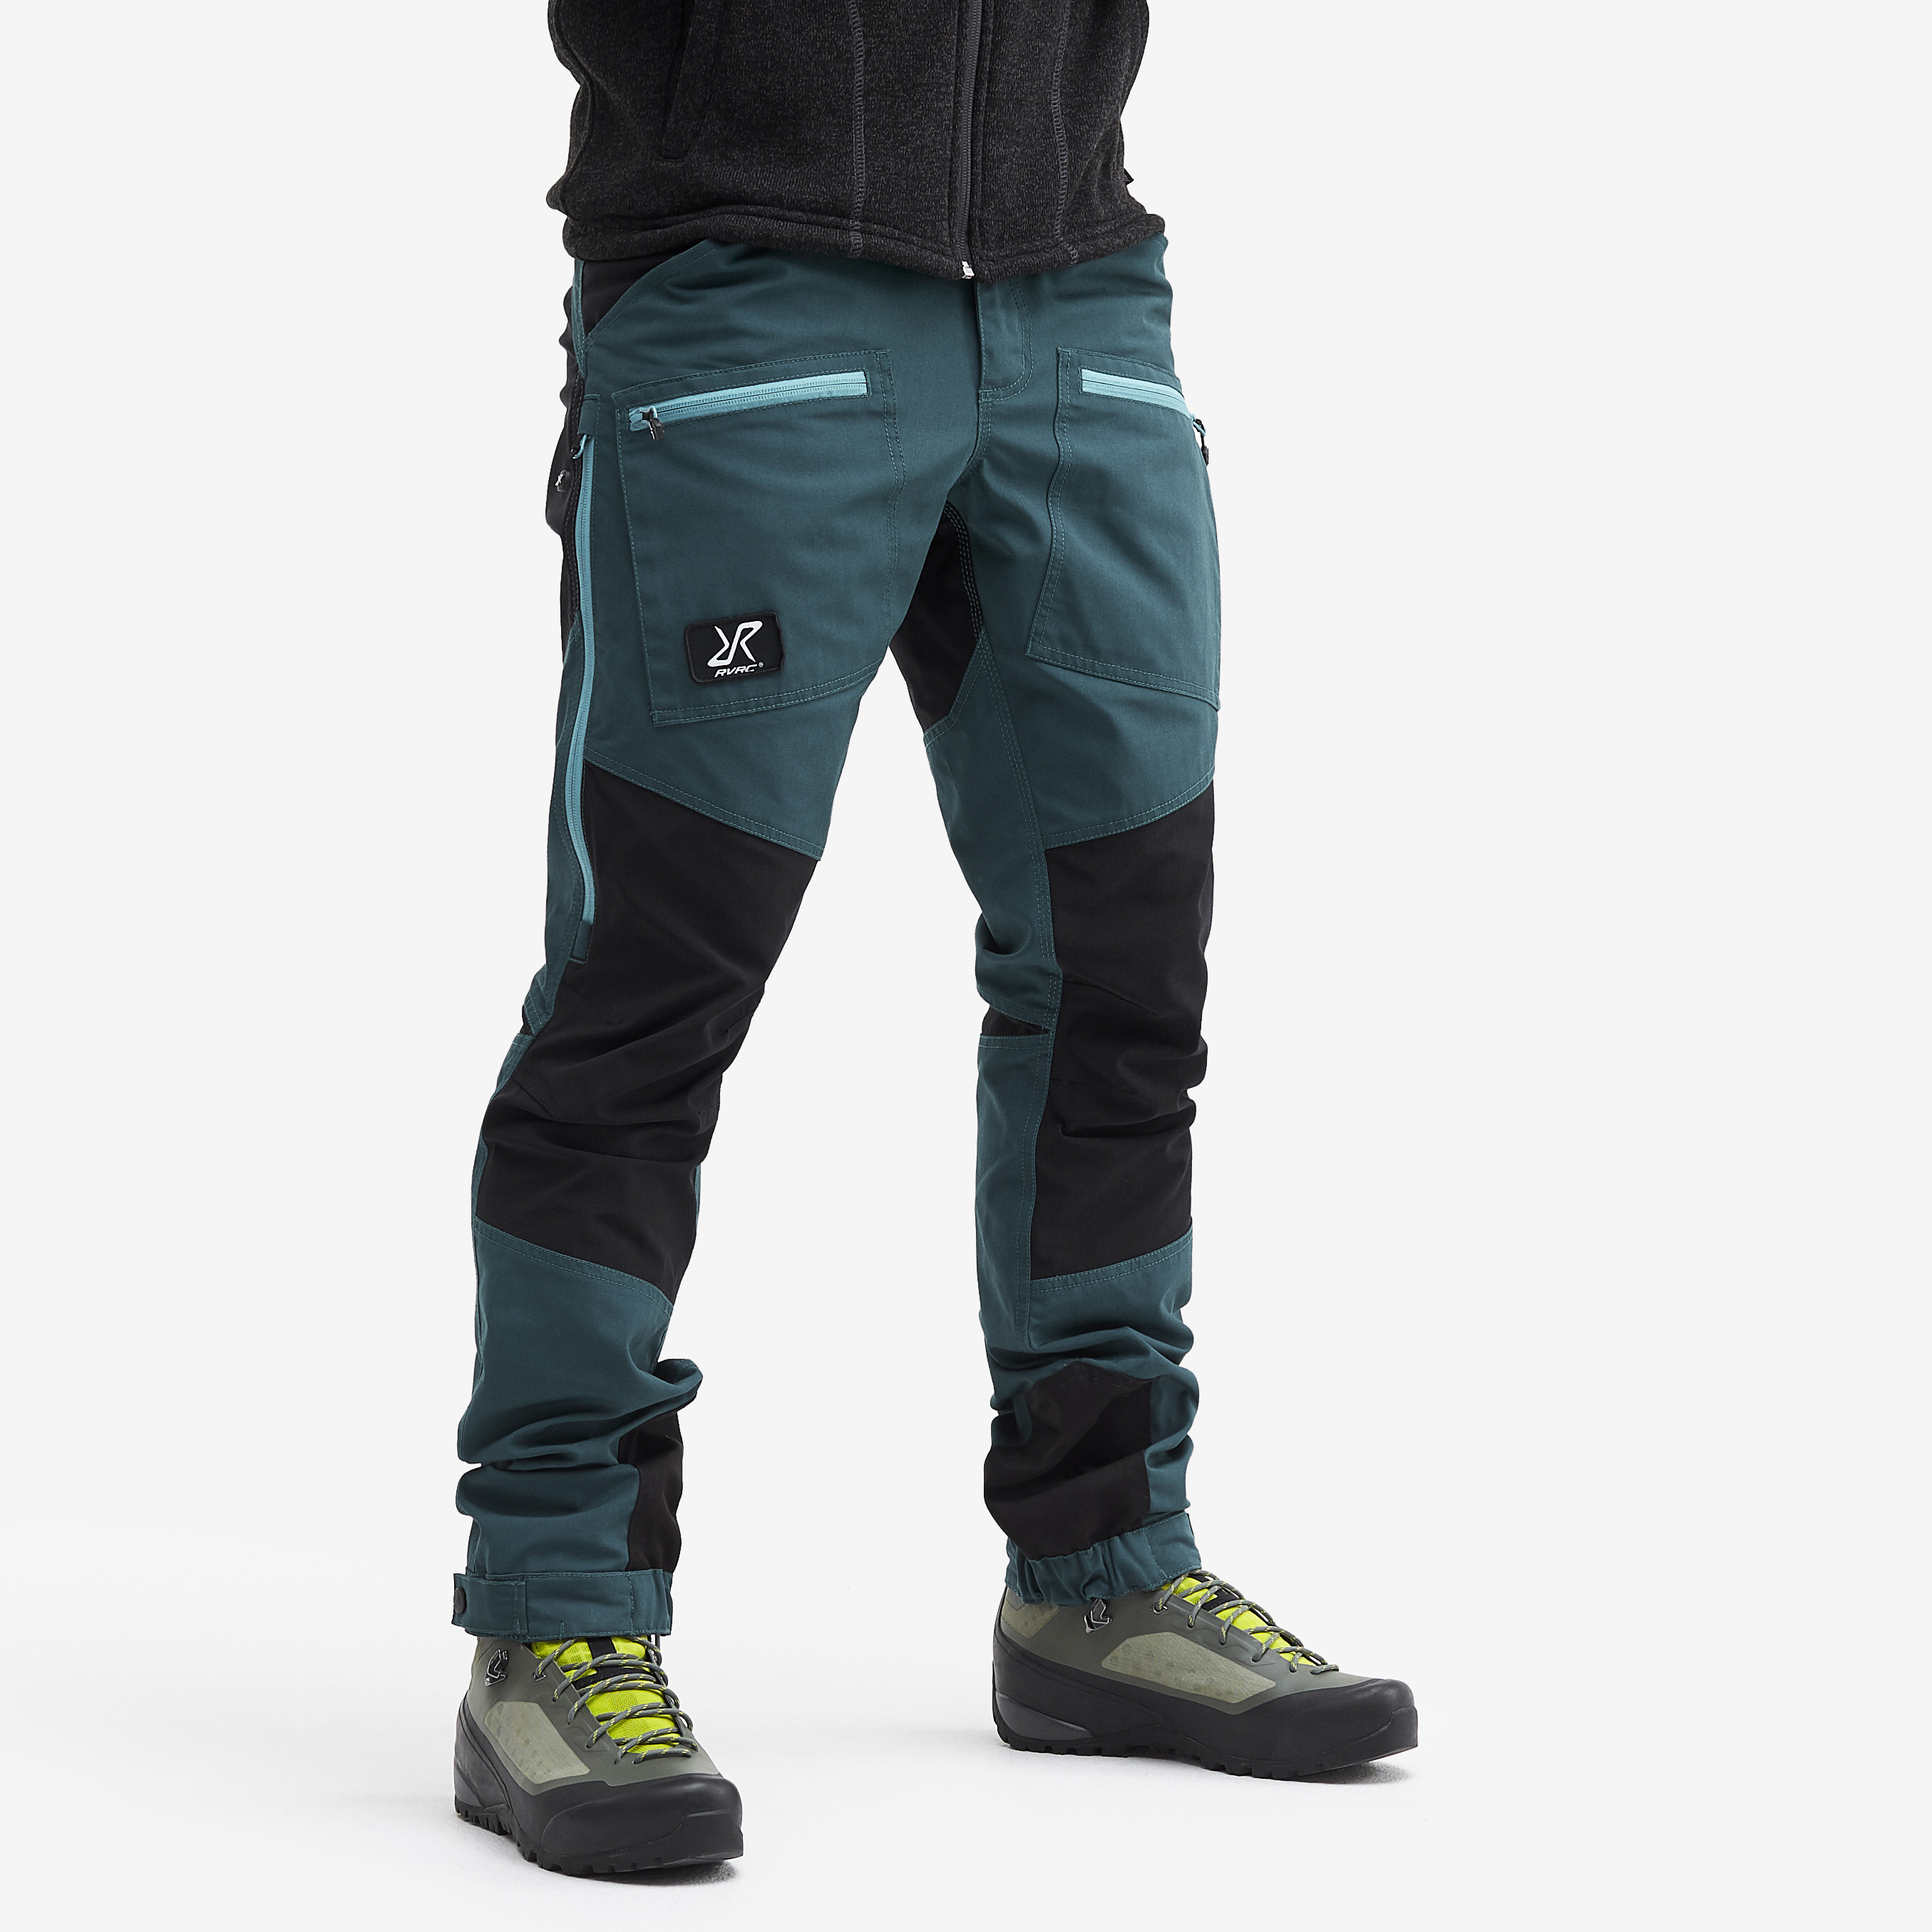 Nordwand Pro hiking pants for men in dark blue